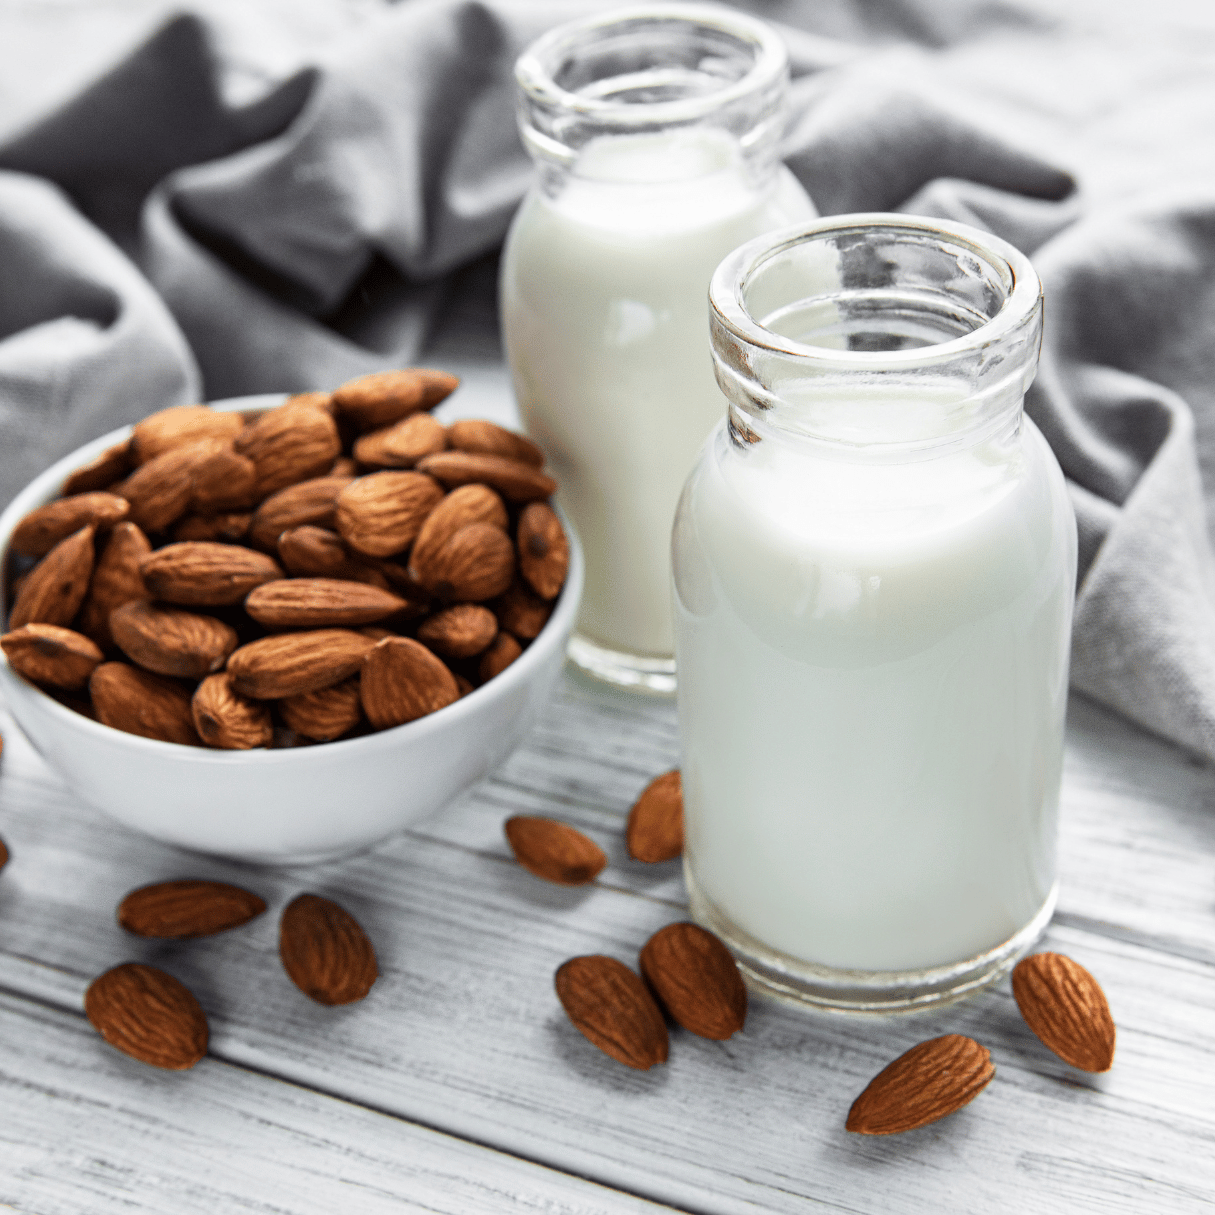 A glass bottle filled with creamy homemade infused almond milk, with scattered almonds in the background